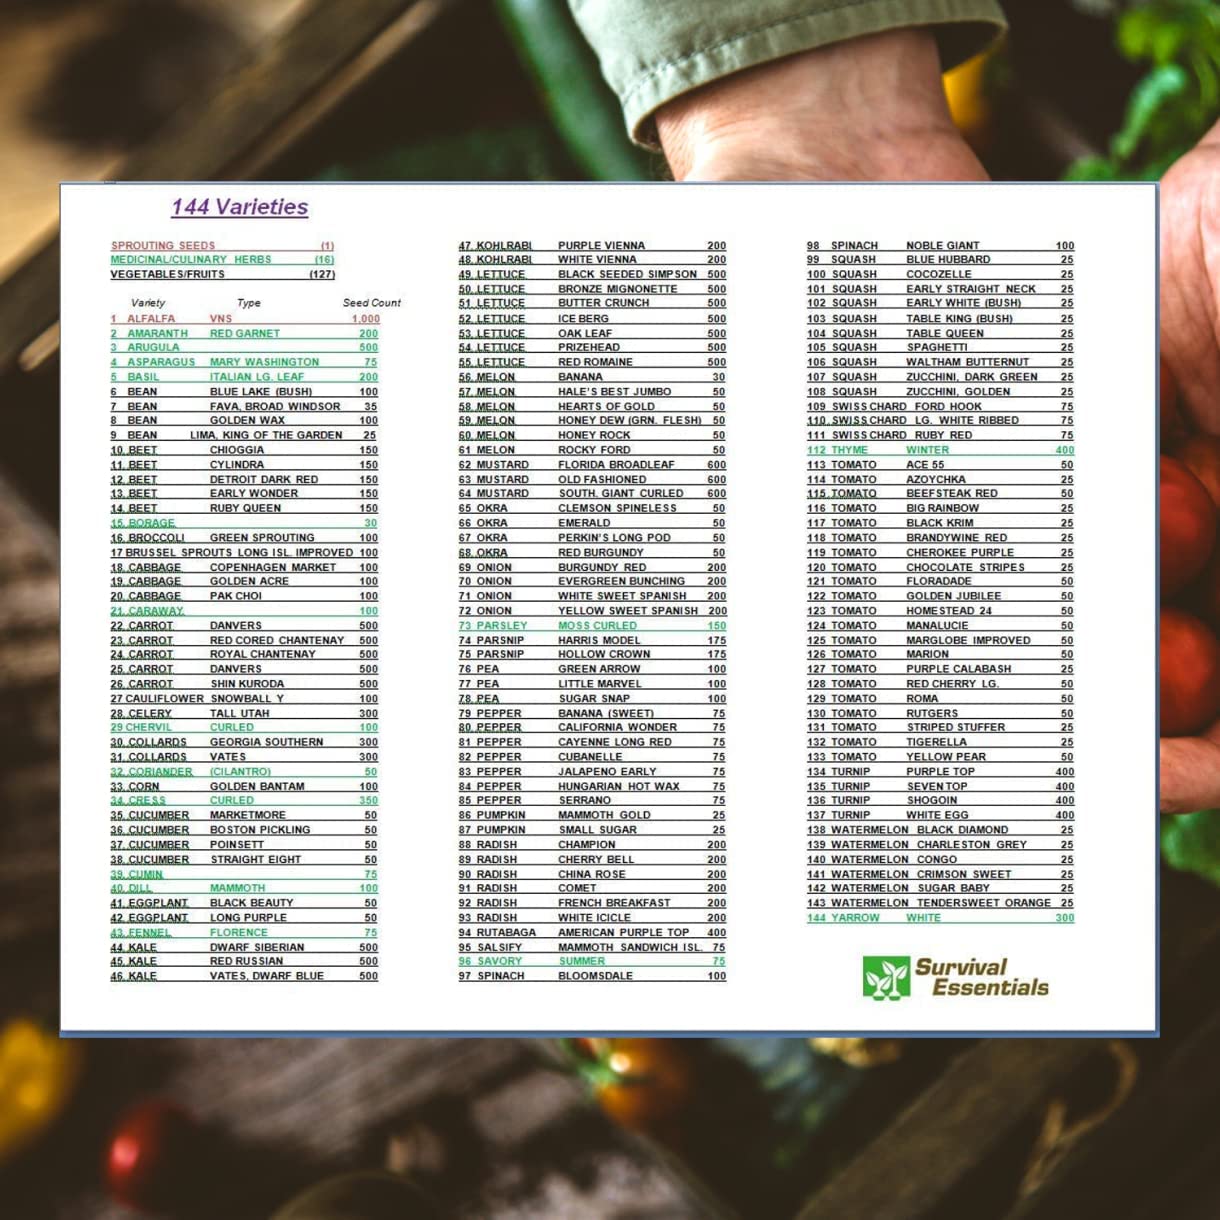 List of 144 seed varieties, including heirloom and diverse plant types, essential for gardening and self-sustainability